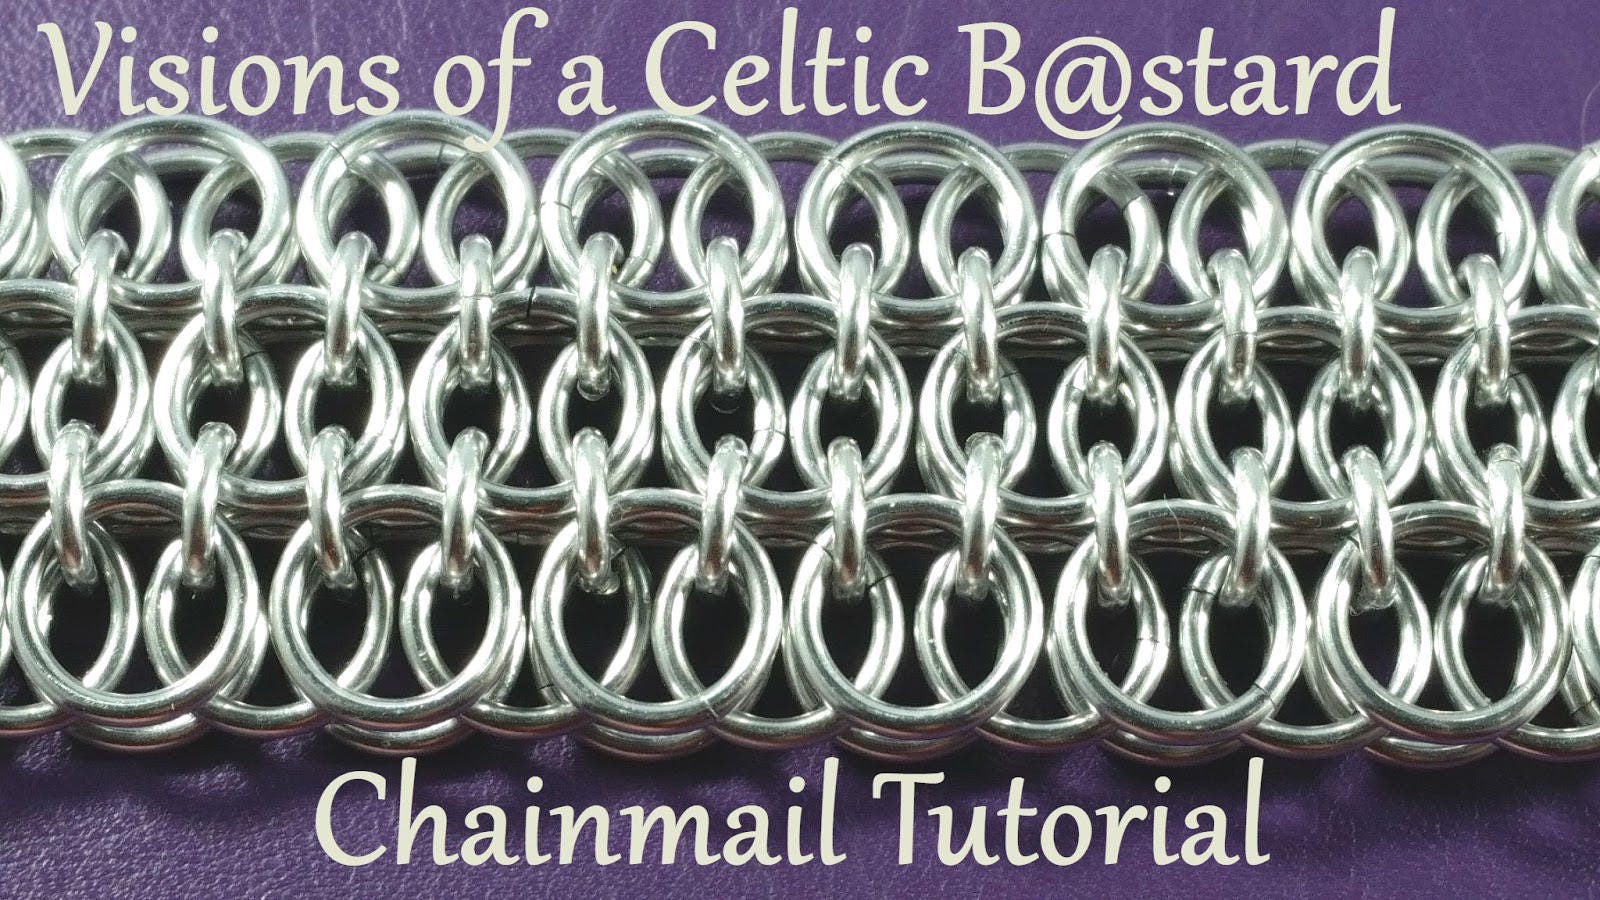 Complete Chainmail Tutorial Collection Book - Chainmail Joe